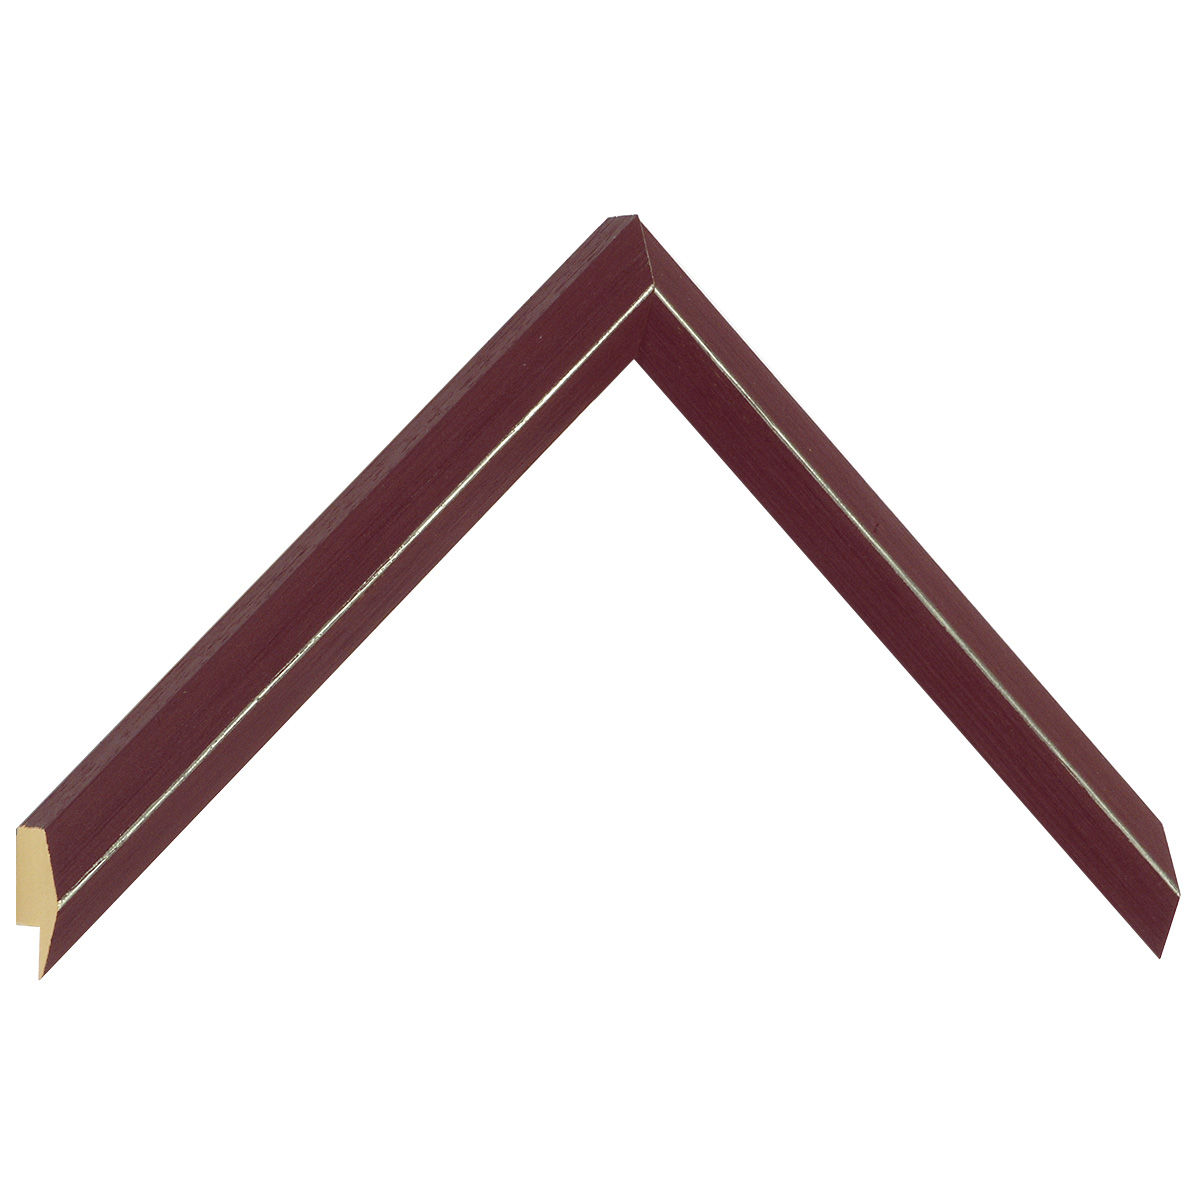 Moulding ayous - height 21mm - widht 18mm - plum - Sample